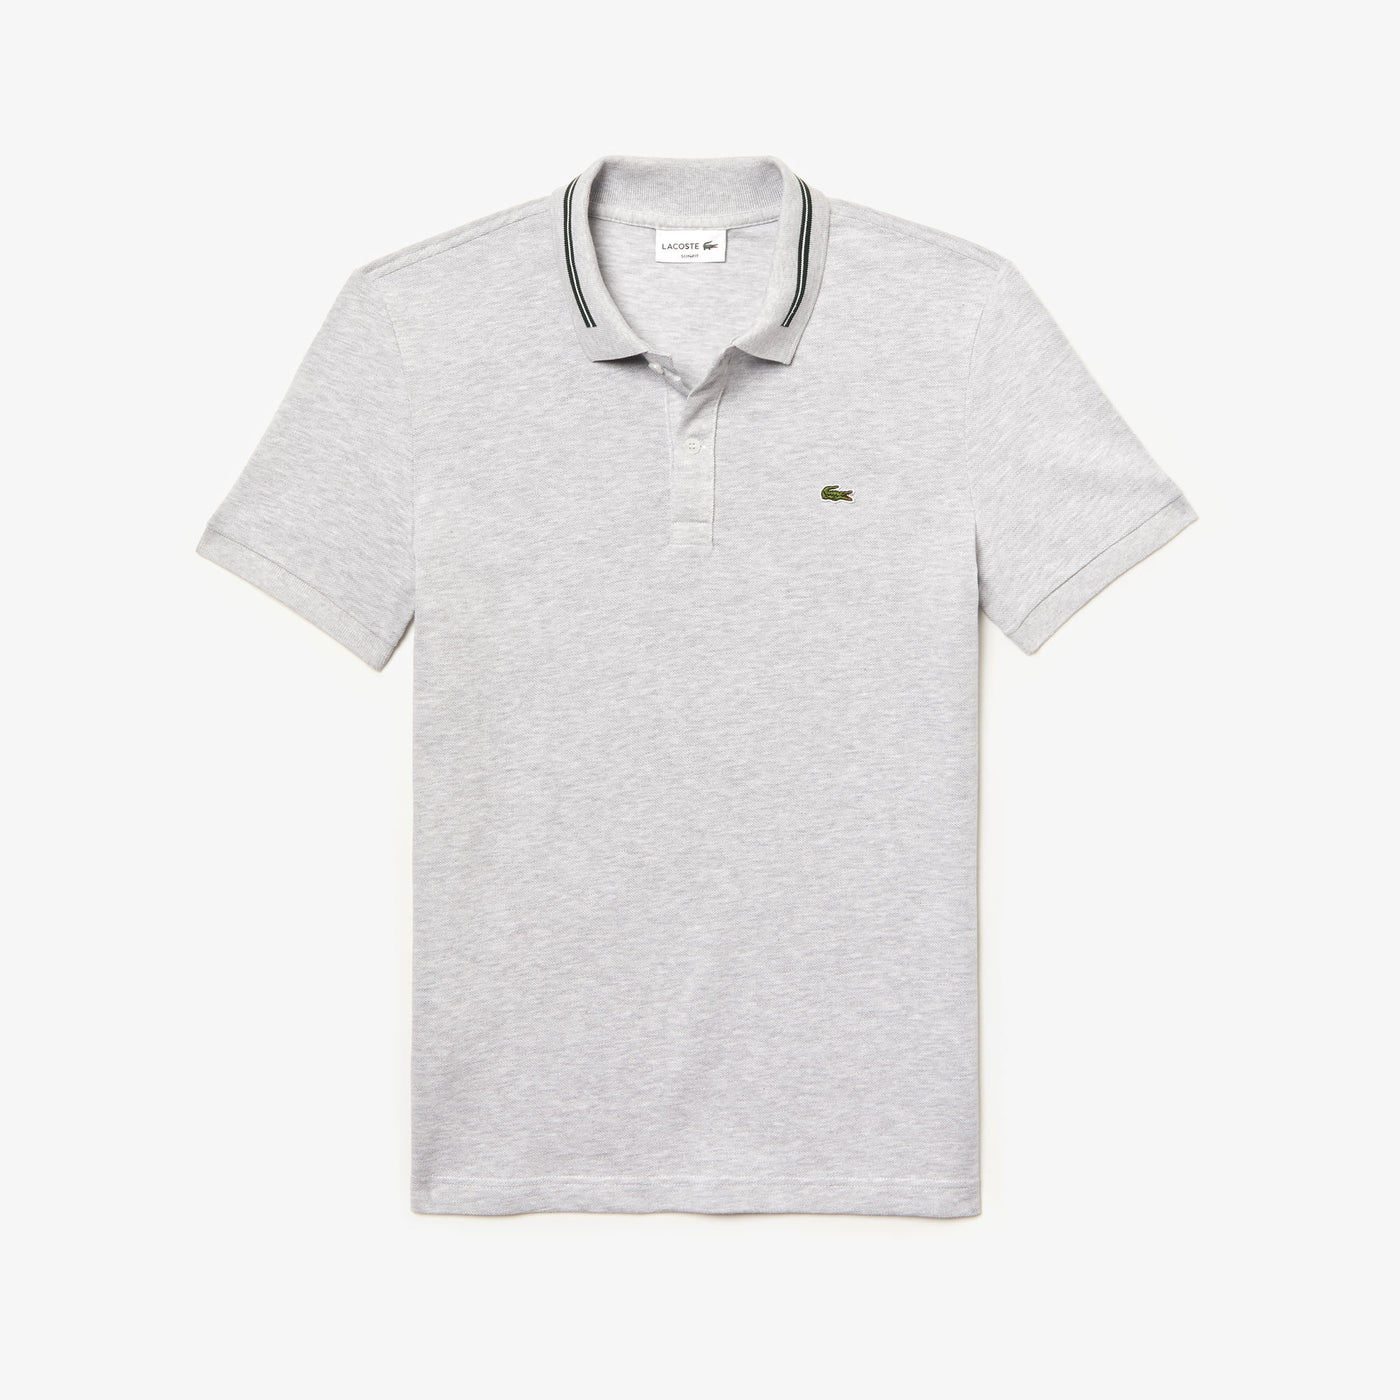 Shop The Latest Collection Of Outlet - Lacoste Men'S Short Sleeve Polo - Ph8522 In Lebanon